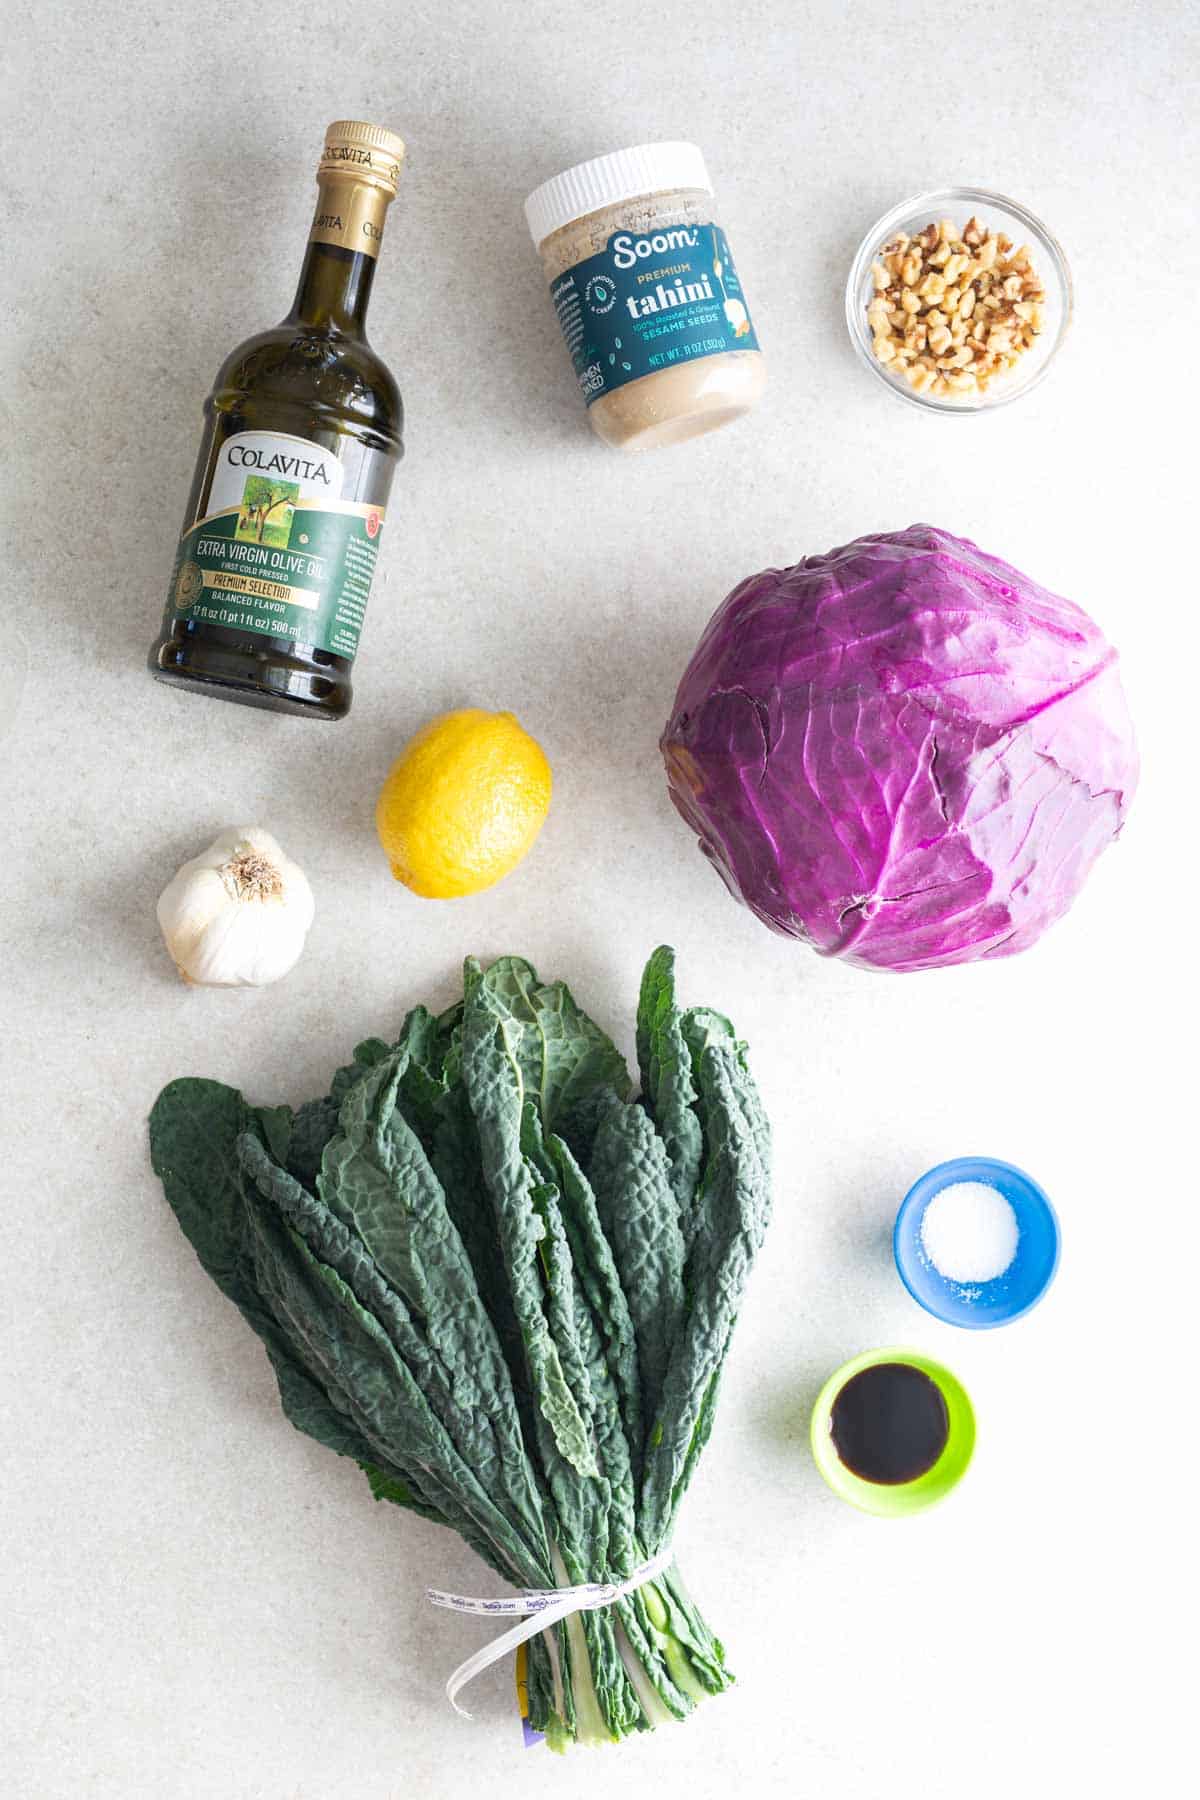 The ingredients for a kale salad are laid out on a table.